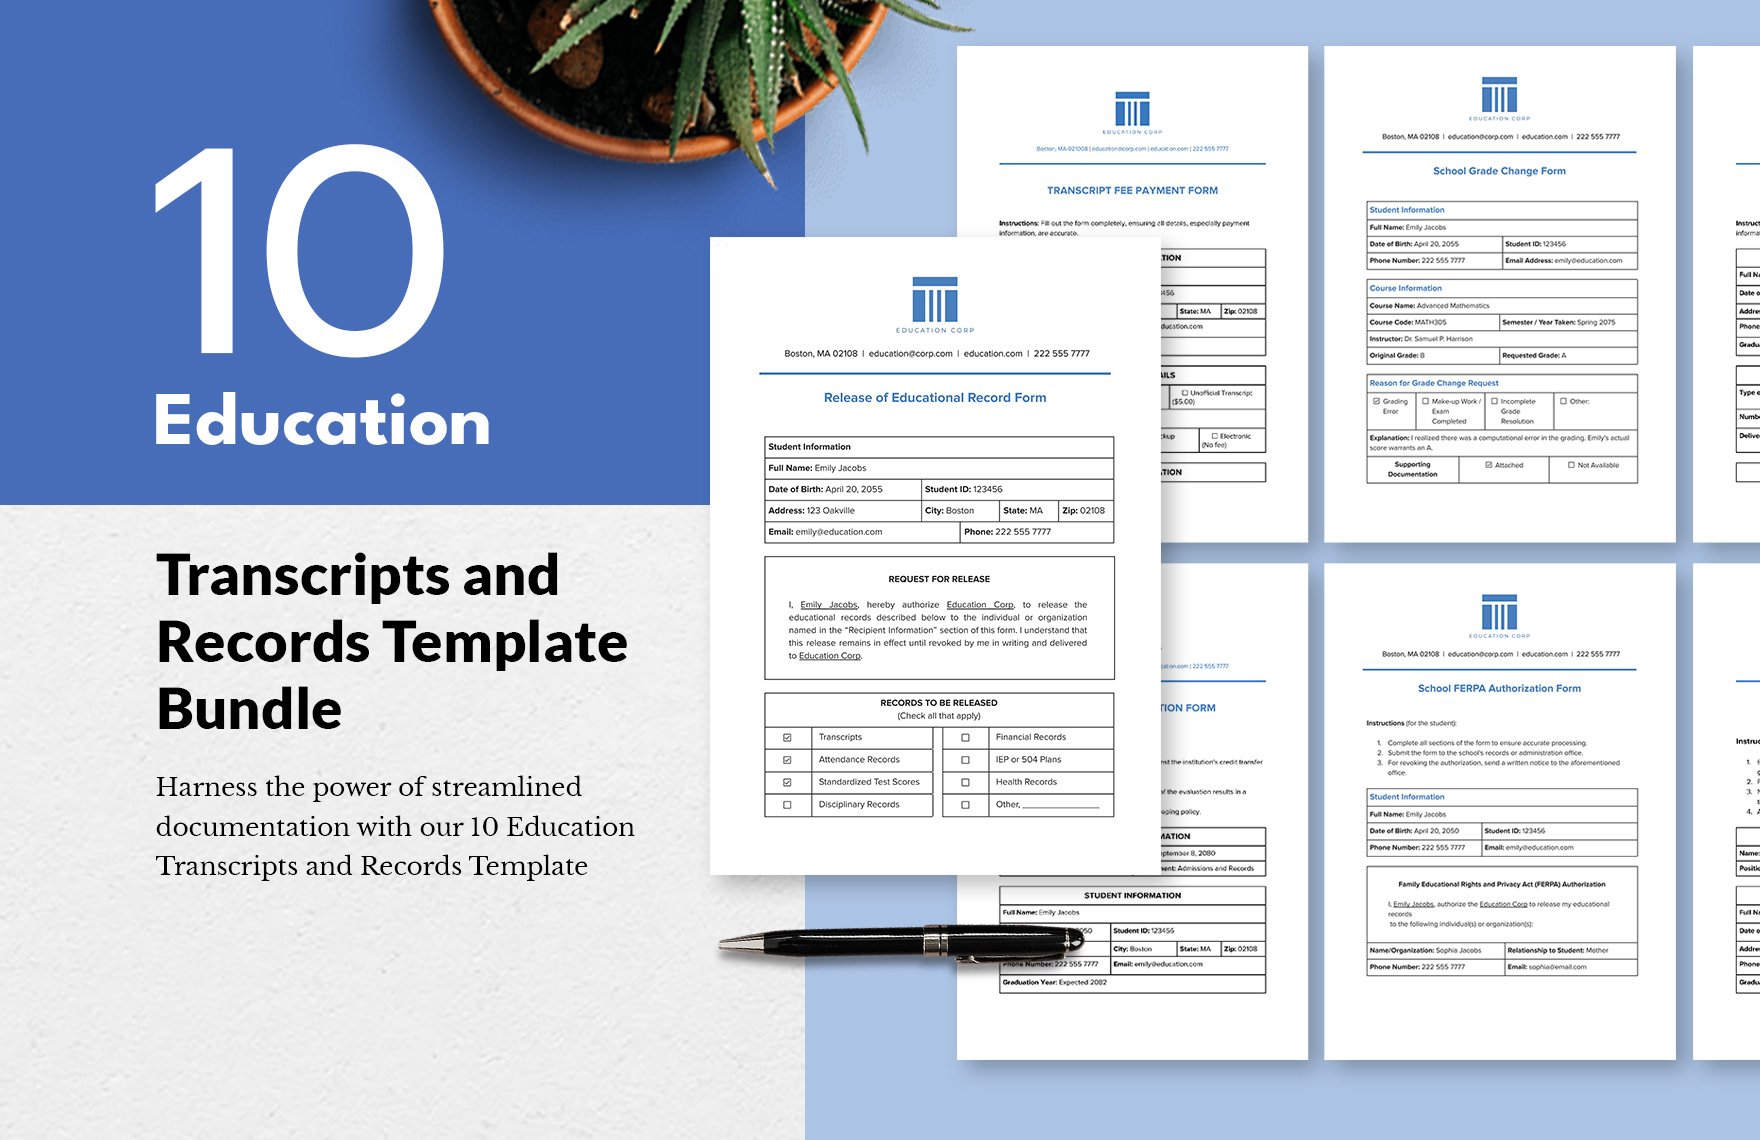 10 Education Transcripts and Records Template Bundle